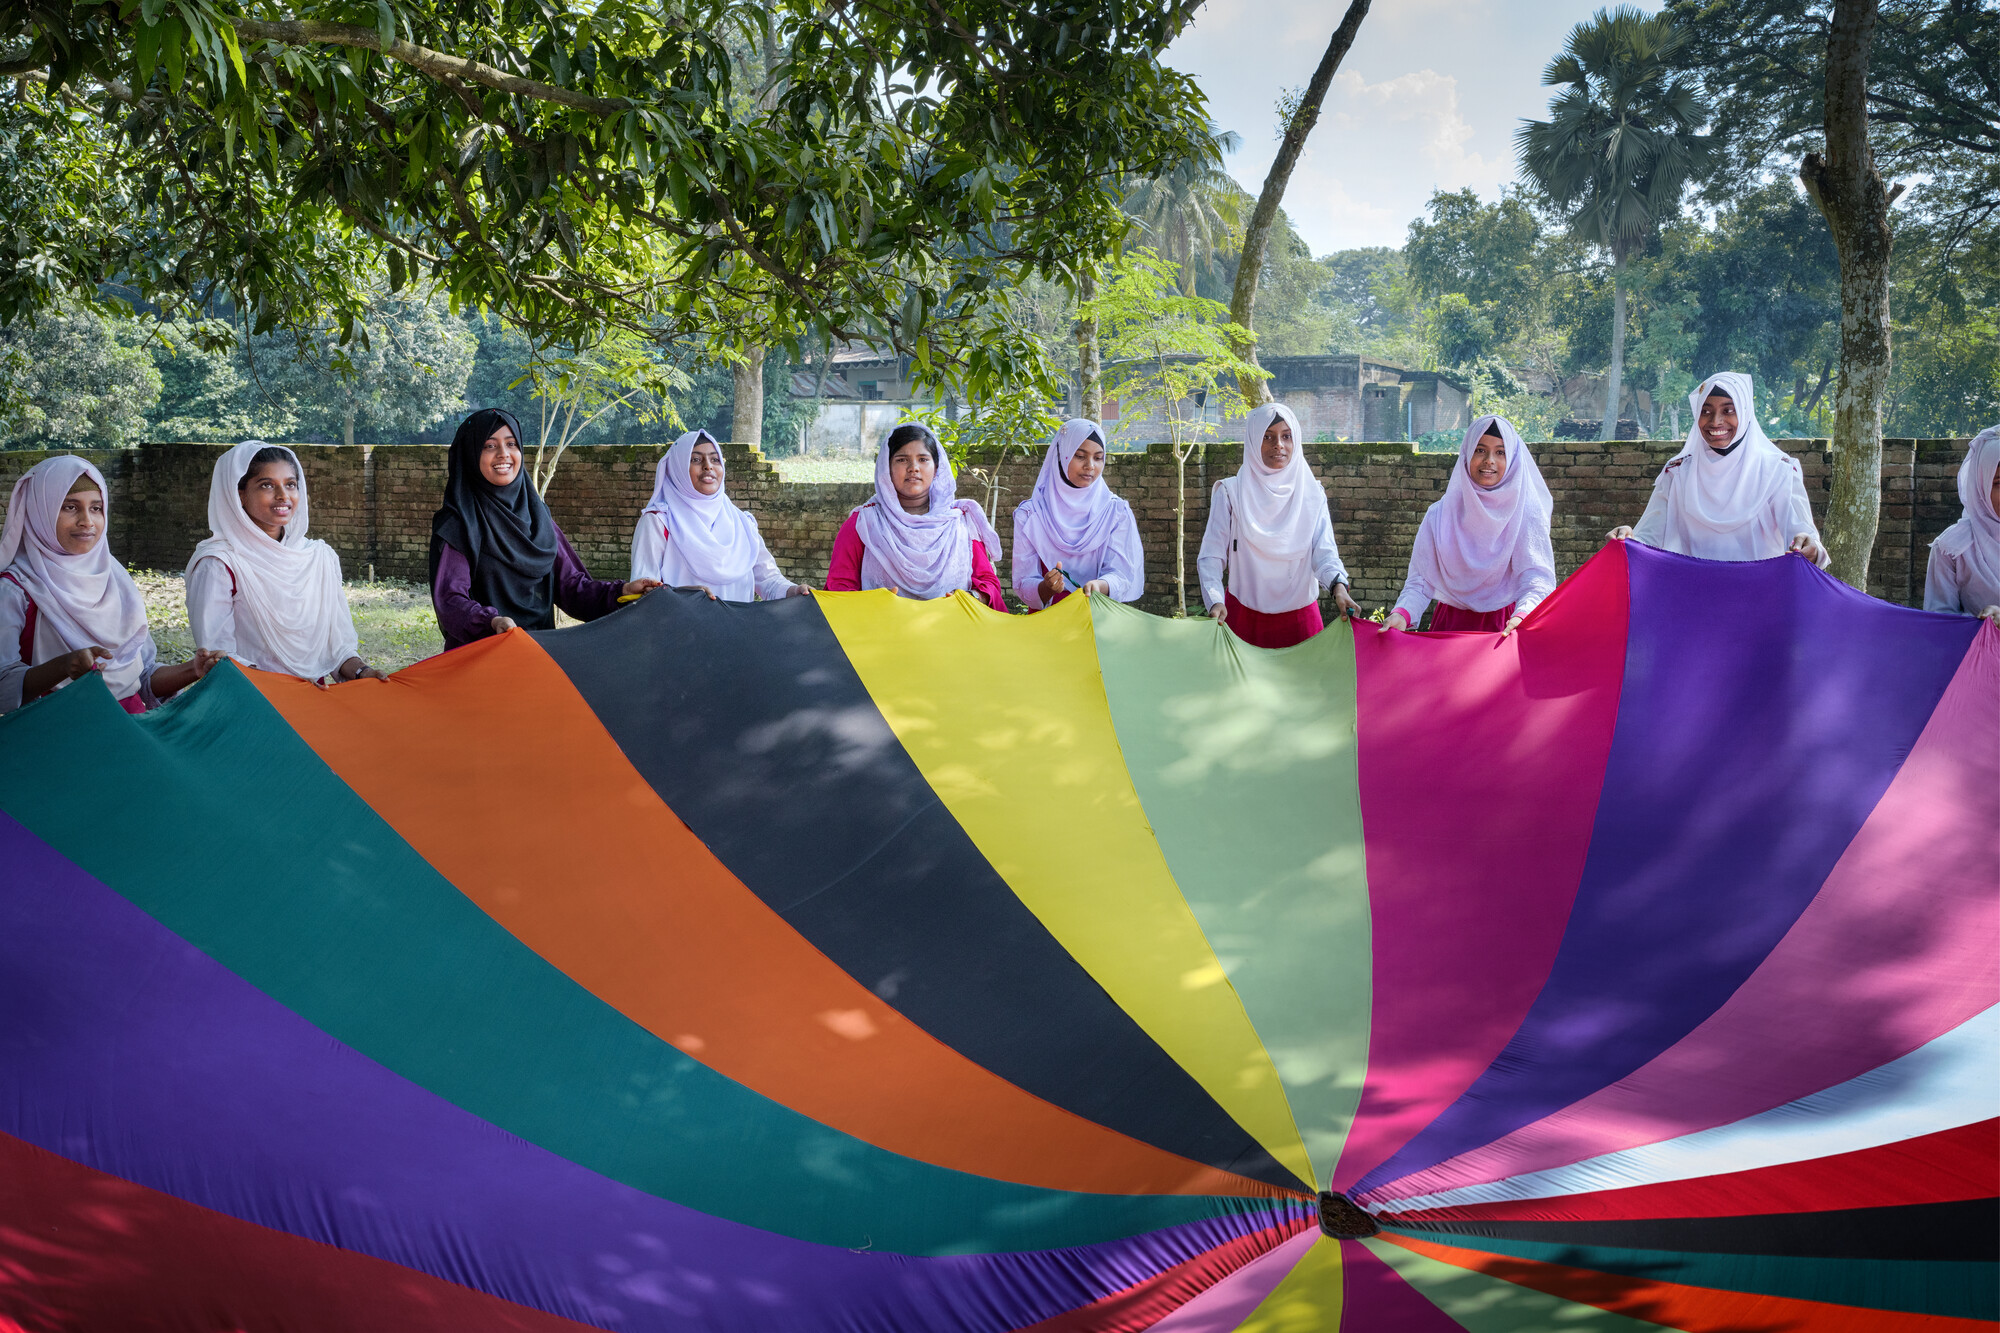 Girls play with a parachute